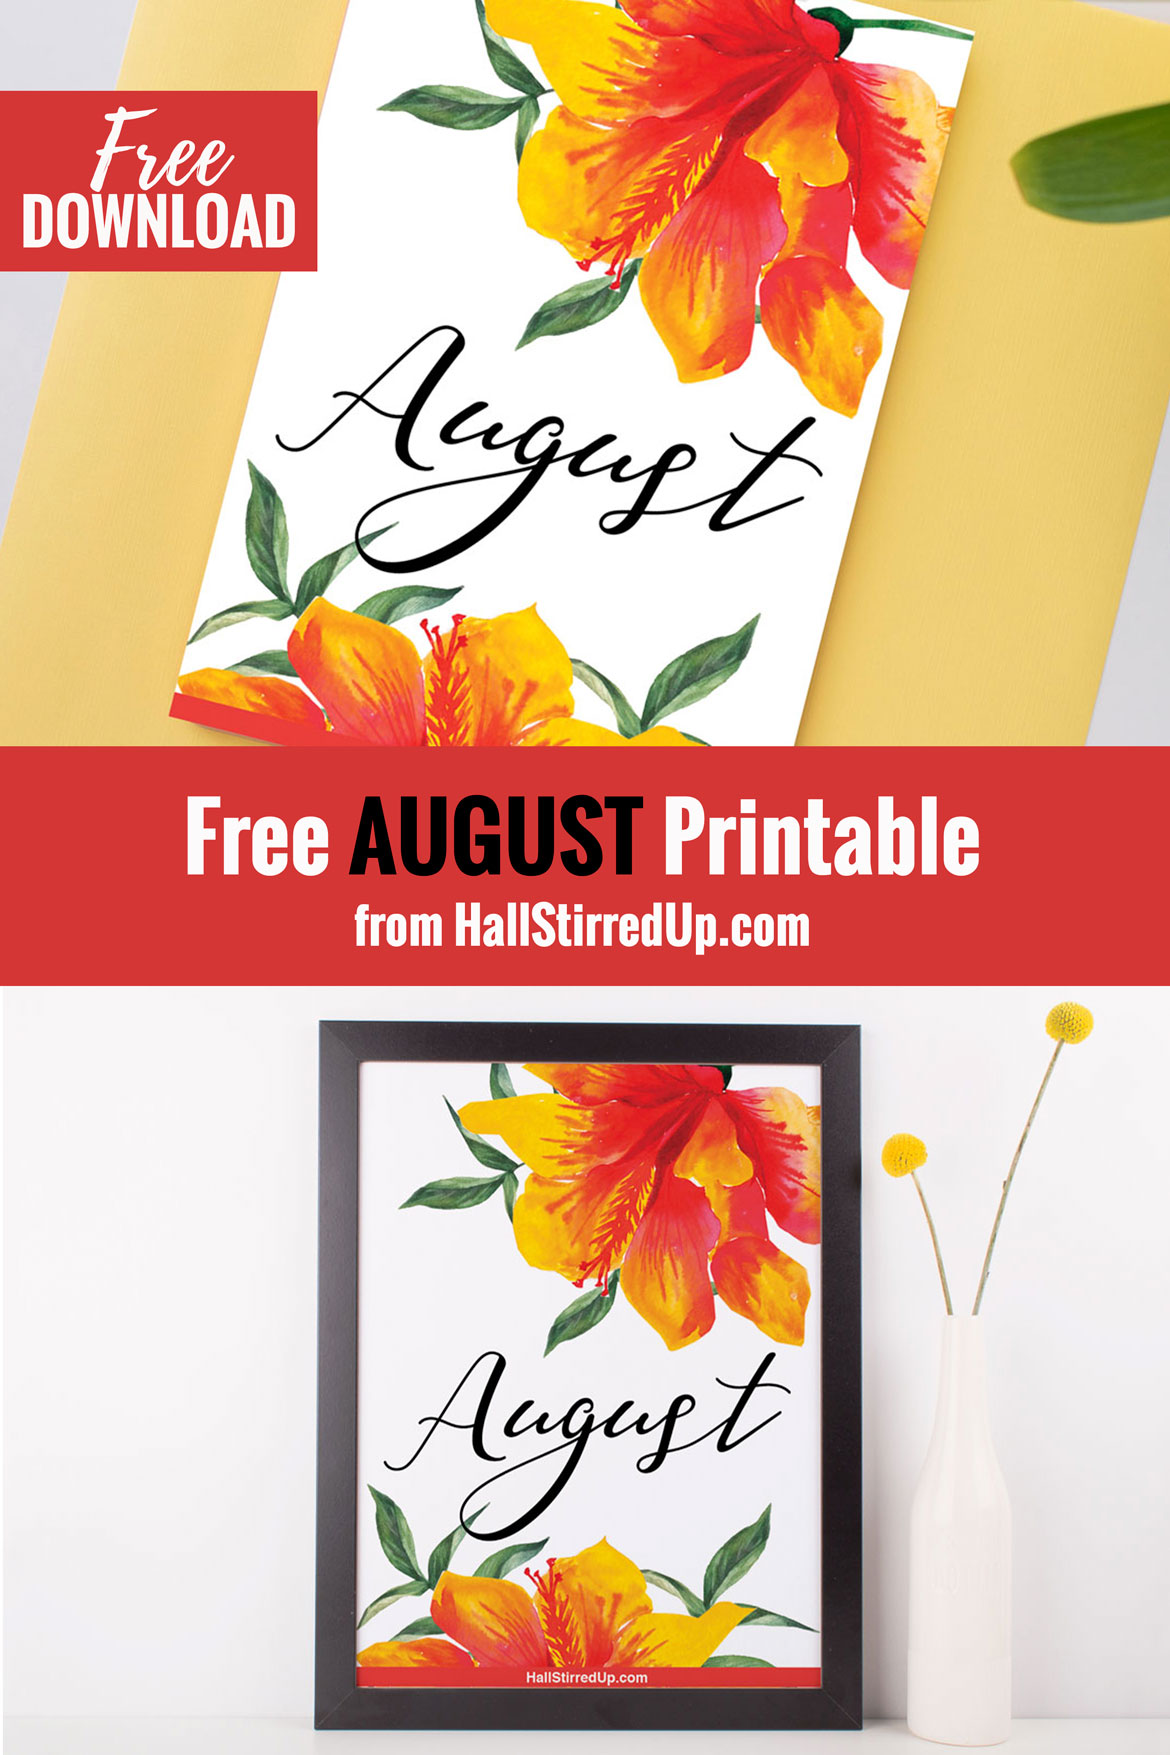 Enjoy August with a pretty free printable